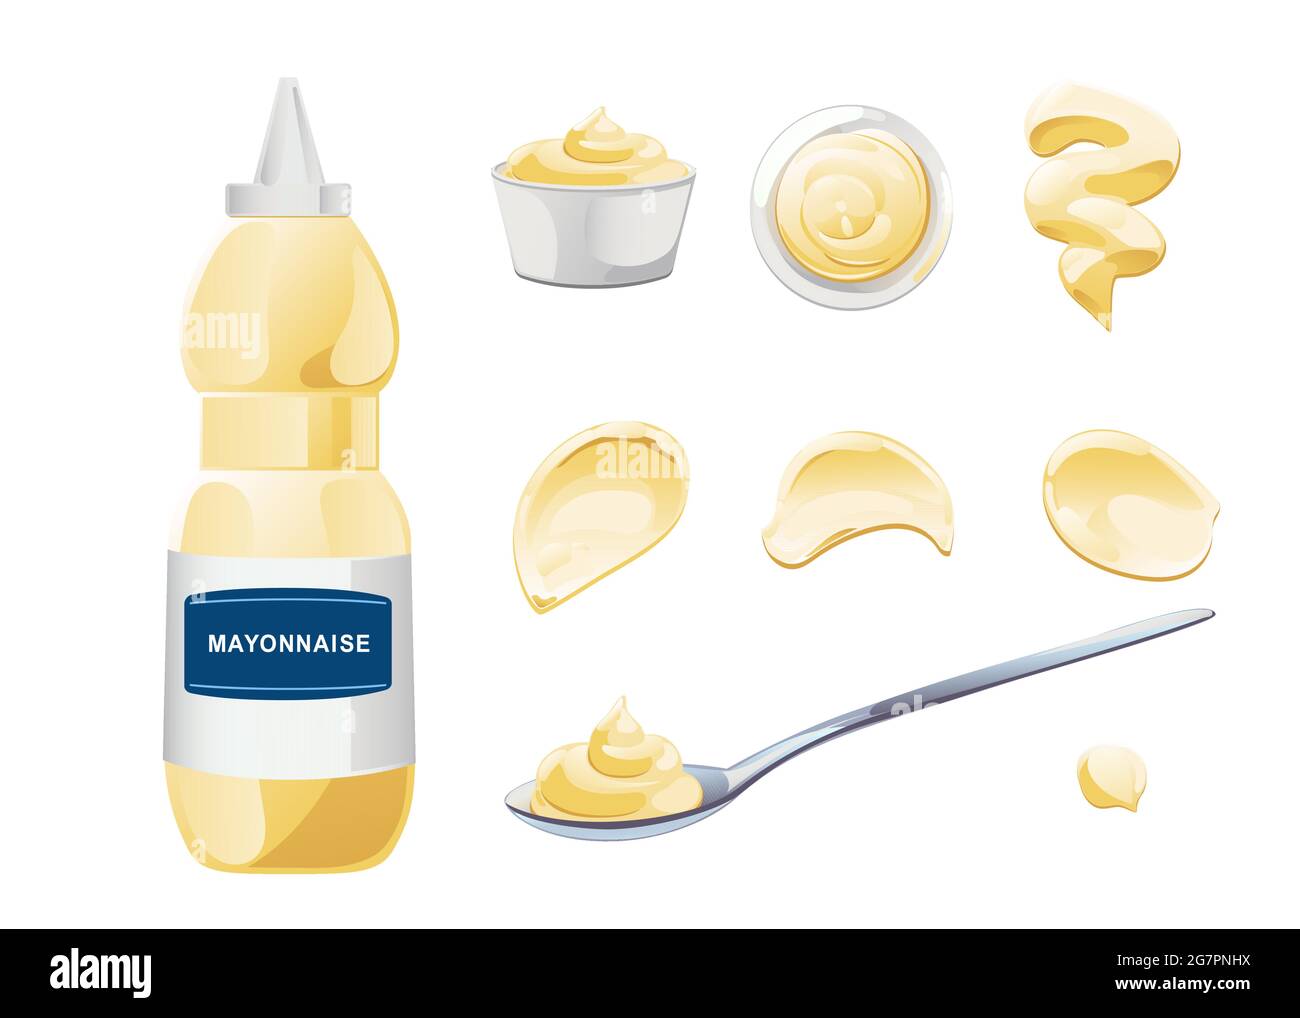 Mayonnaise in bowl, bottle, stains and splash set. Condiment white ...